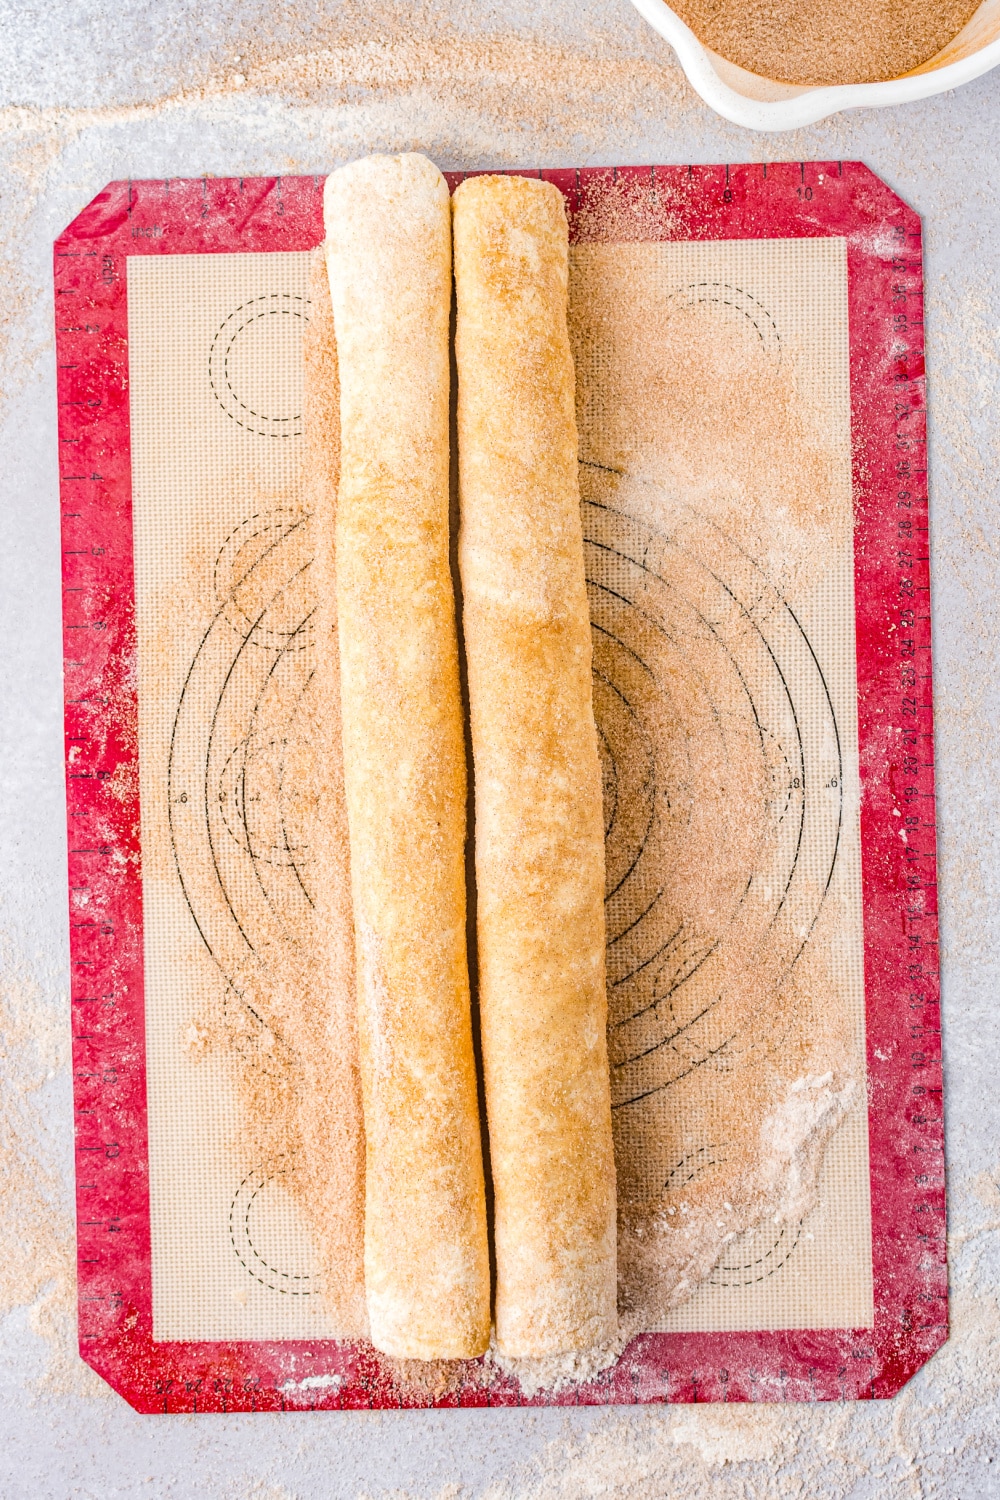 Puff pastry rolled on each side toward the middle to form the shape of the cookies.